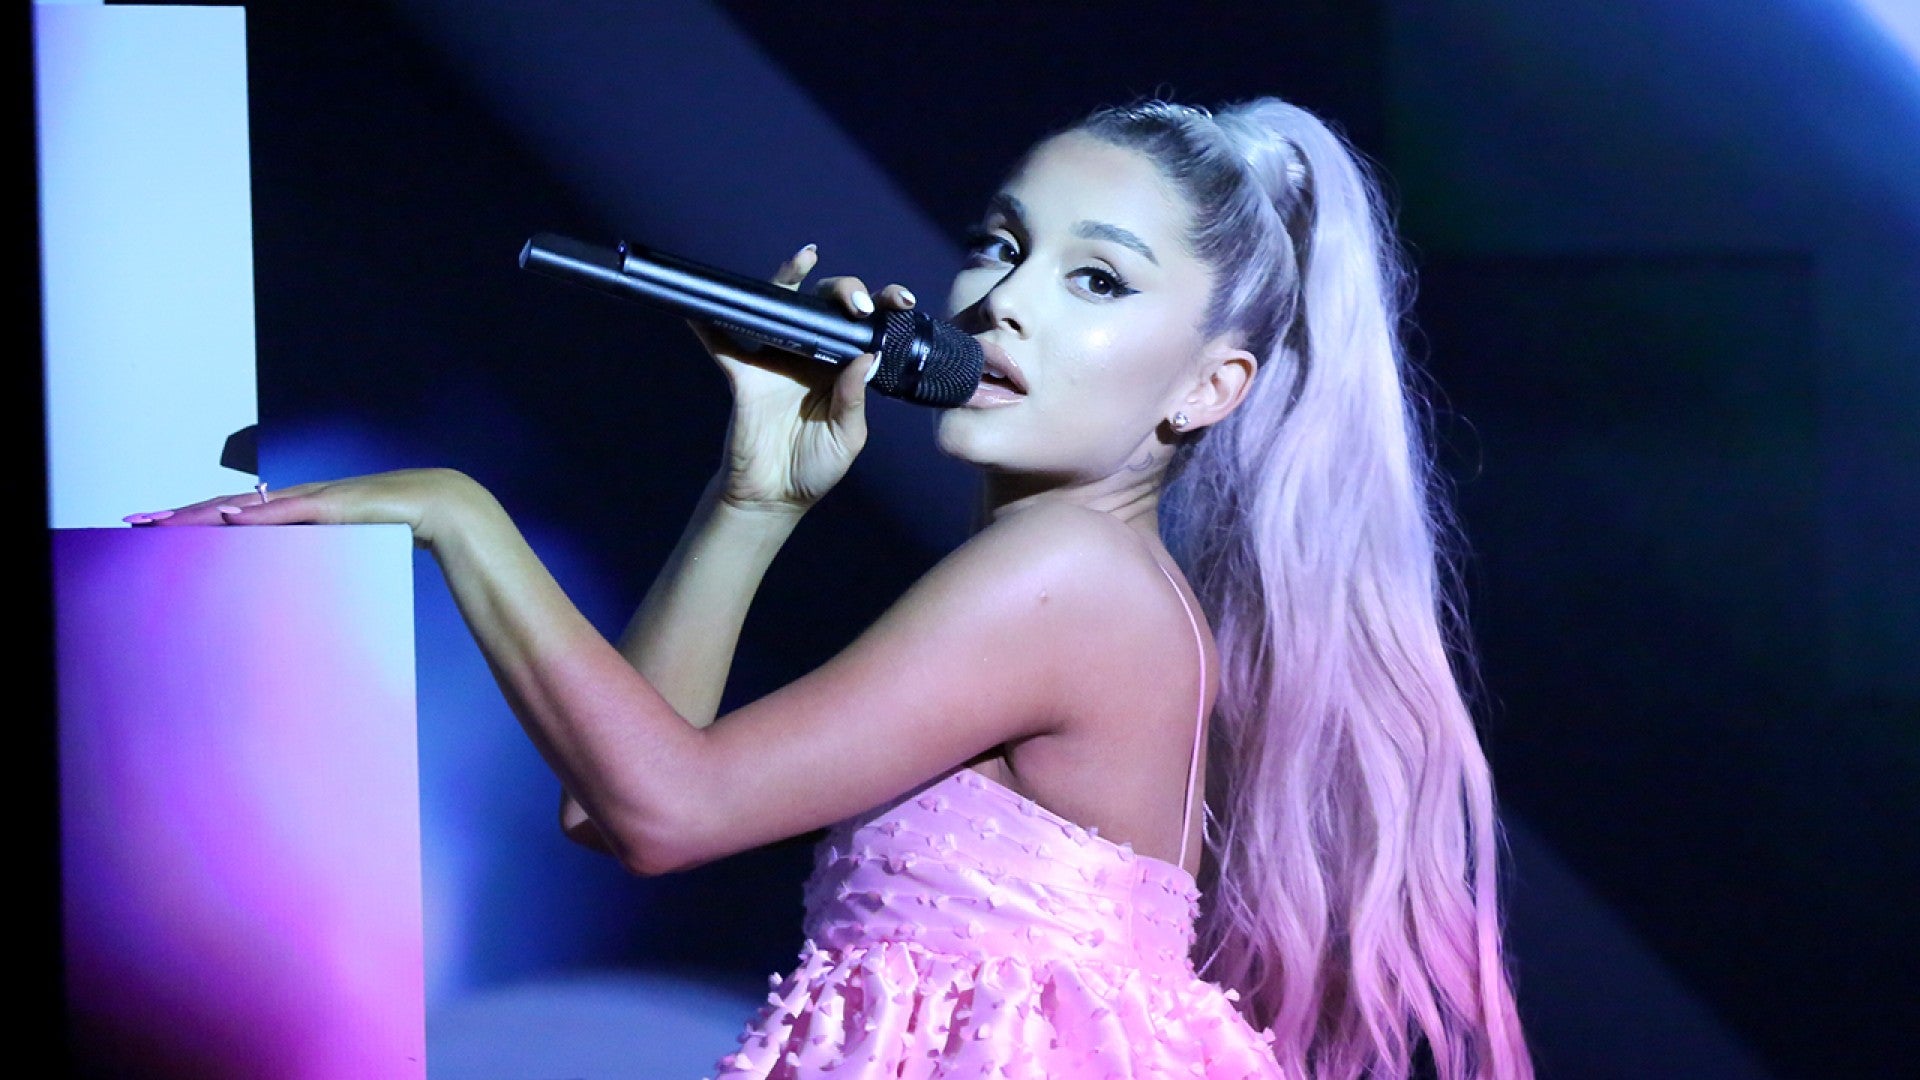 Ariana Grande Hot Naked Lesbian Sex - Ariana Grande Releases Sexy New Single 'God Is a Woman' -- Listen!